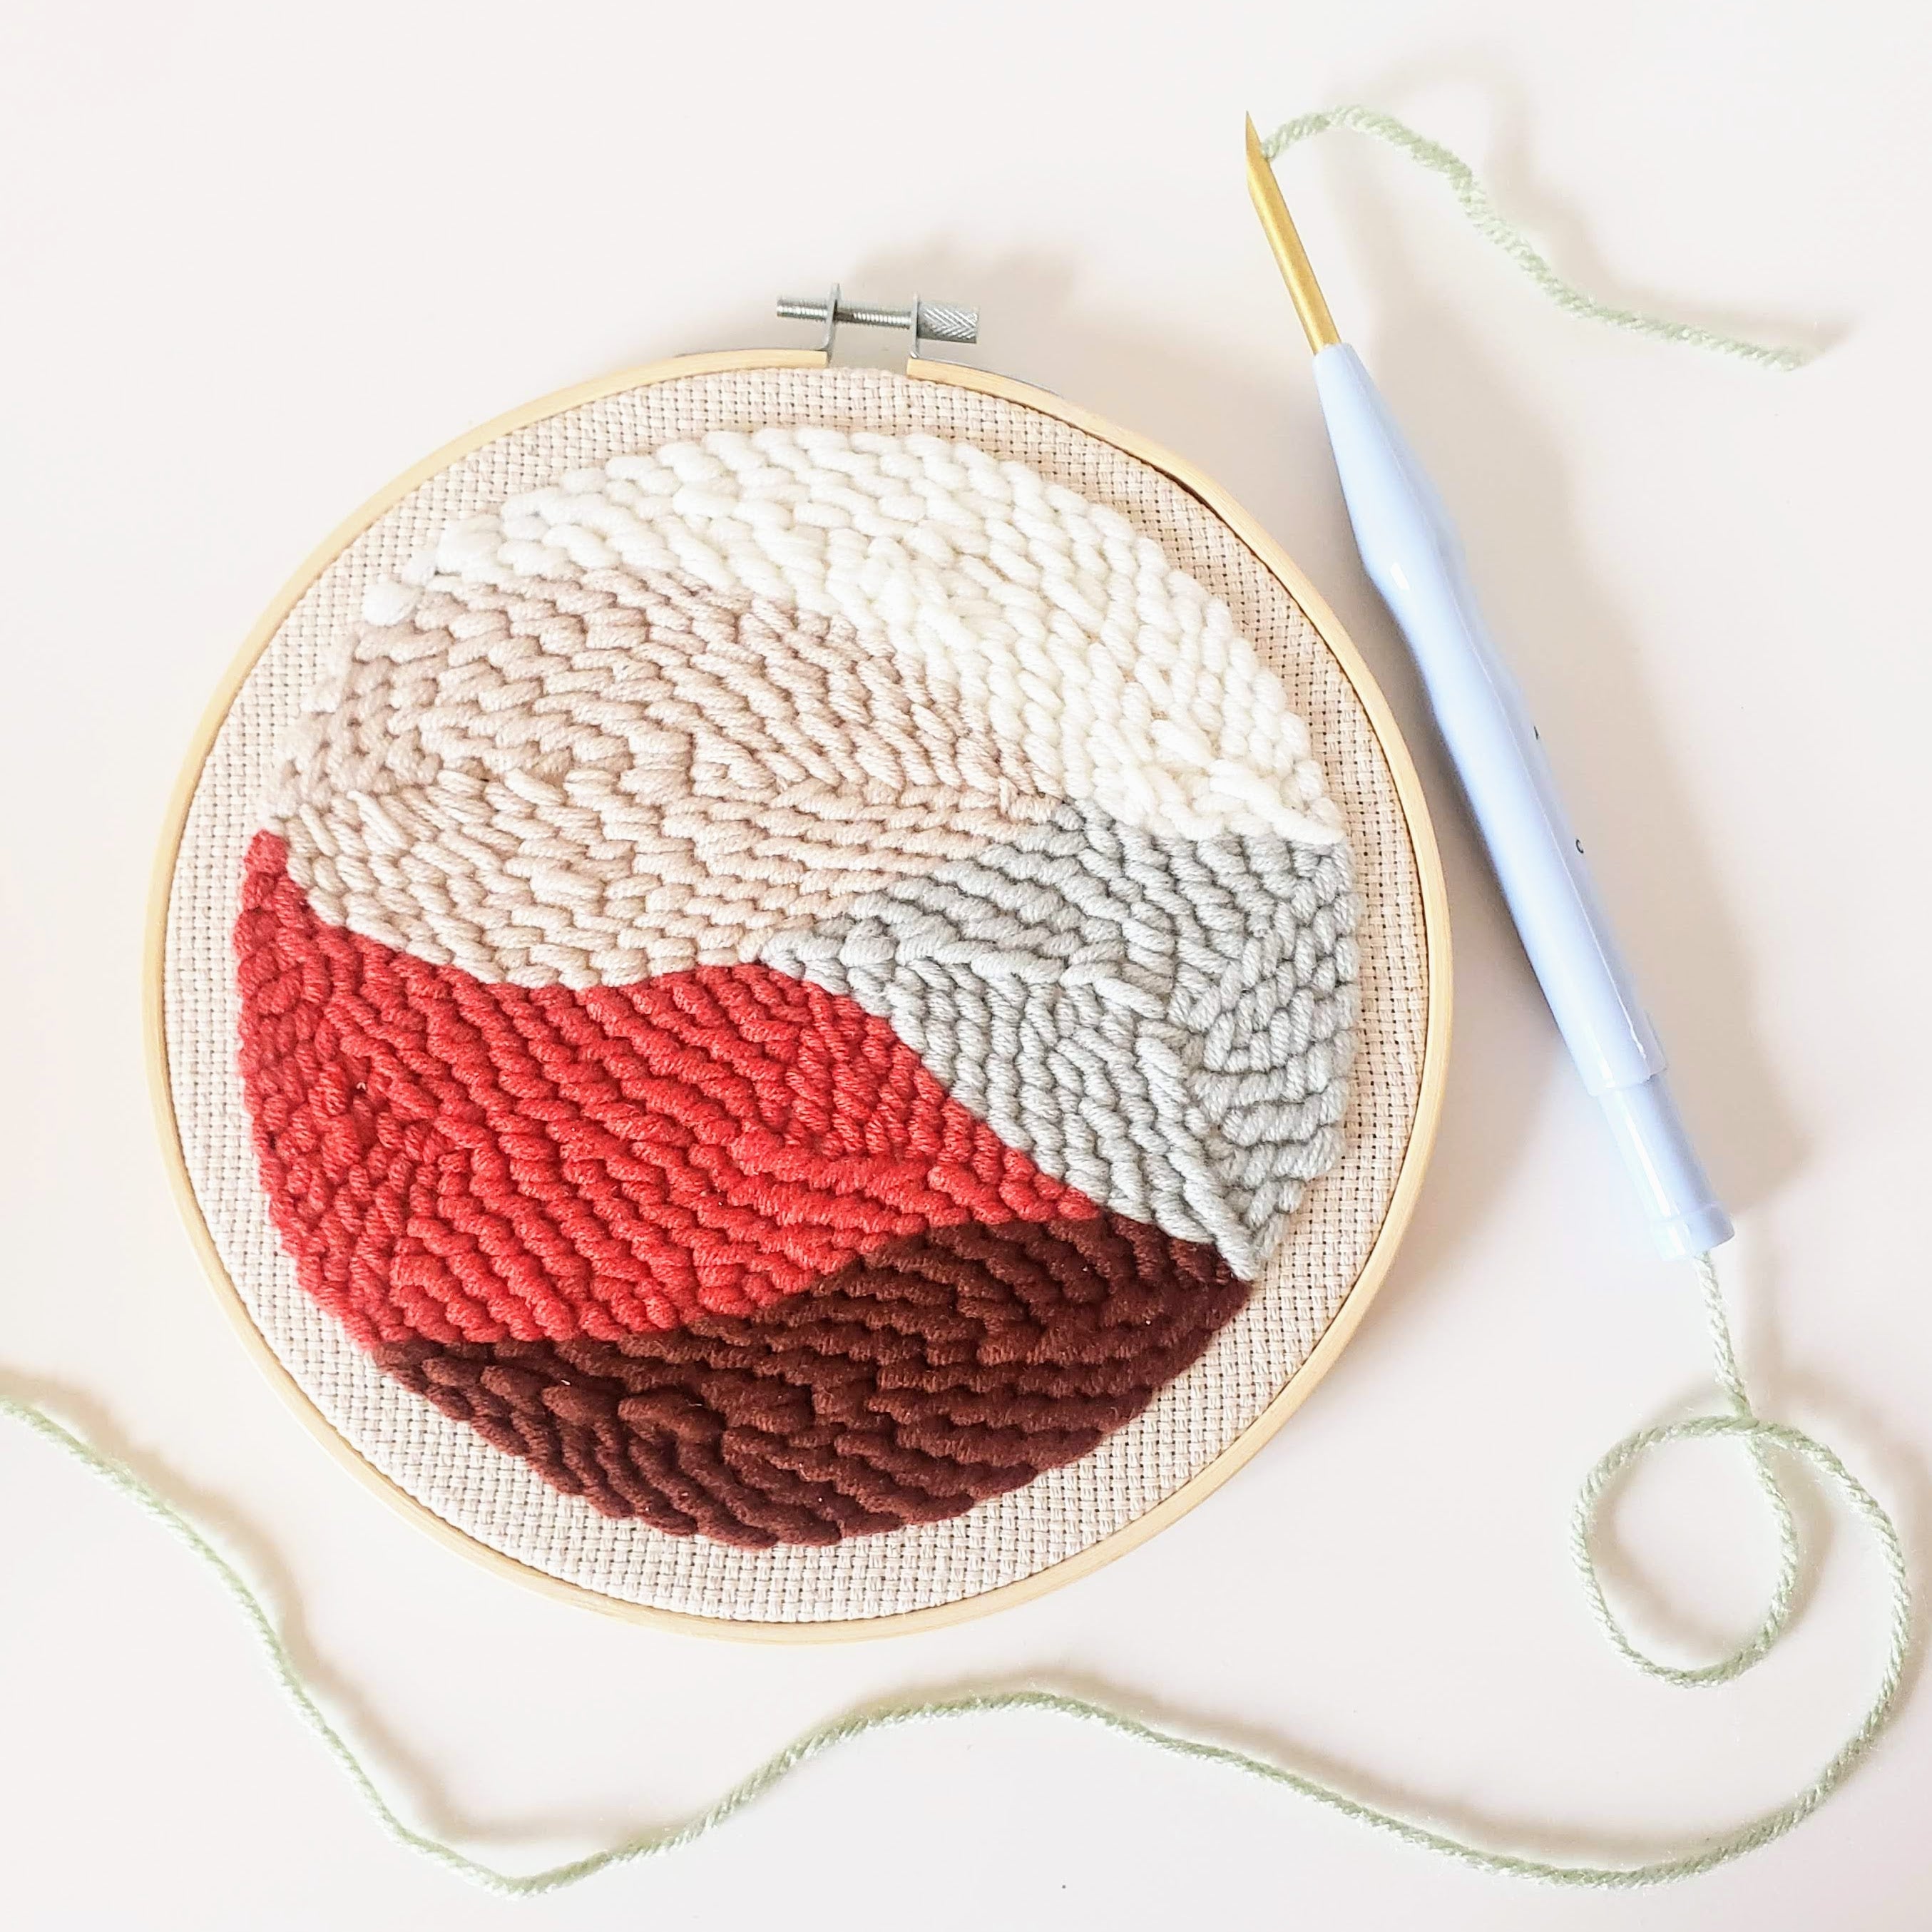 How to do punch needle embroidery - Gathered